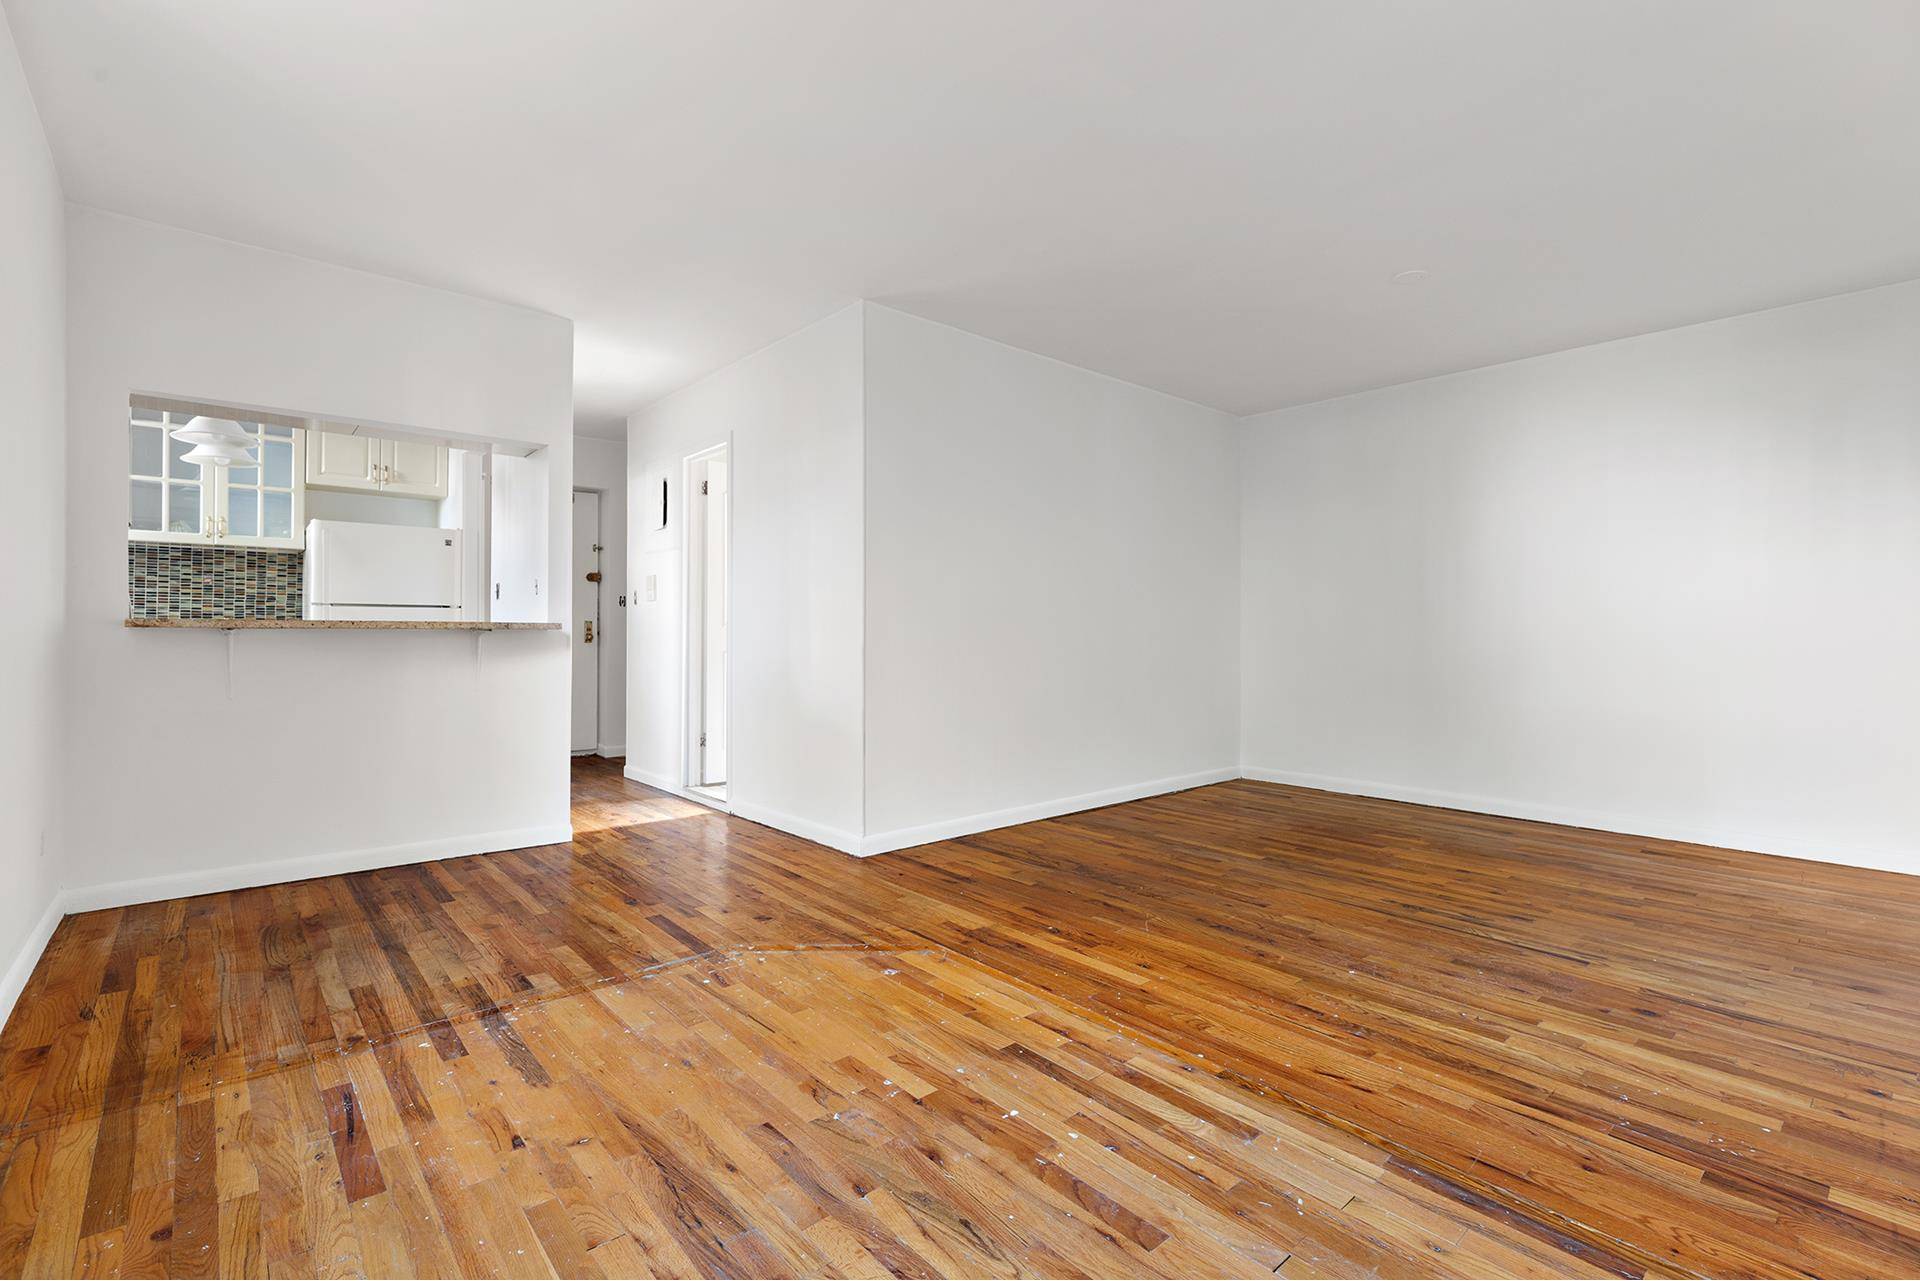 Charming two bedroom, two bath corner unit close to Parade Grounds amp ; Prospect Park.